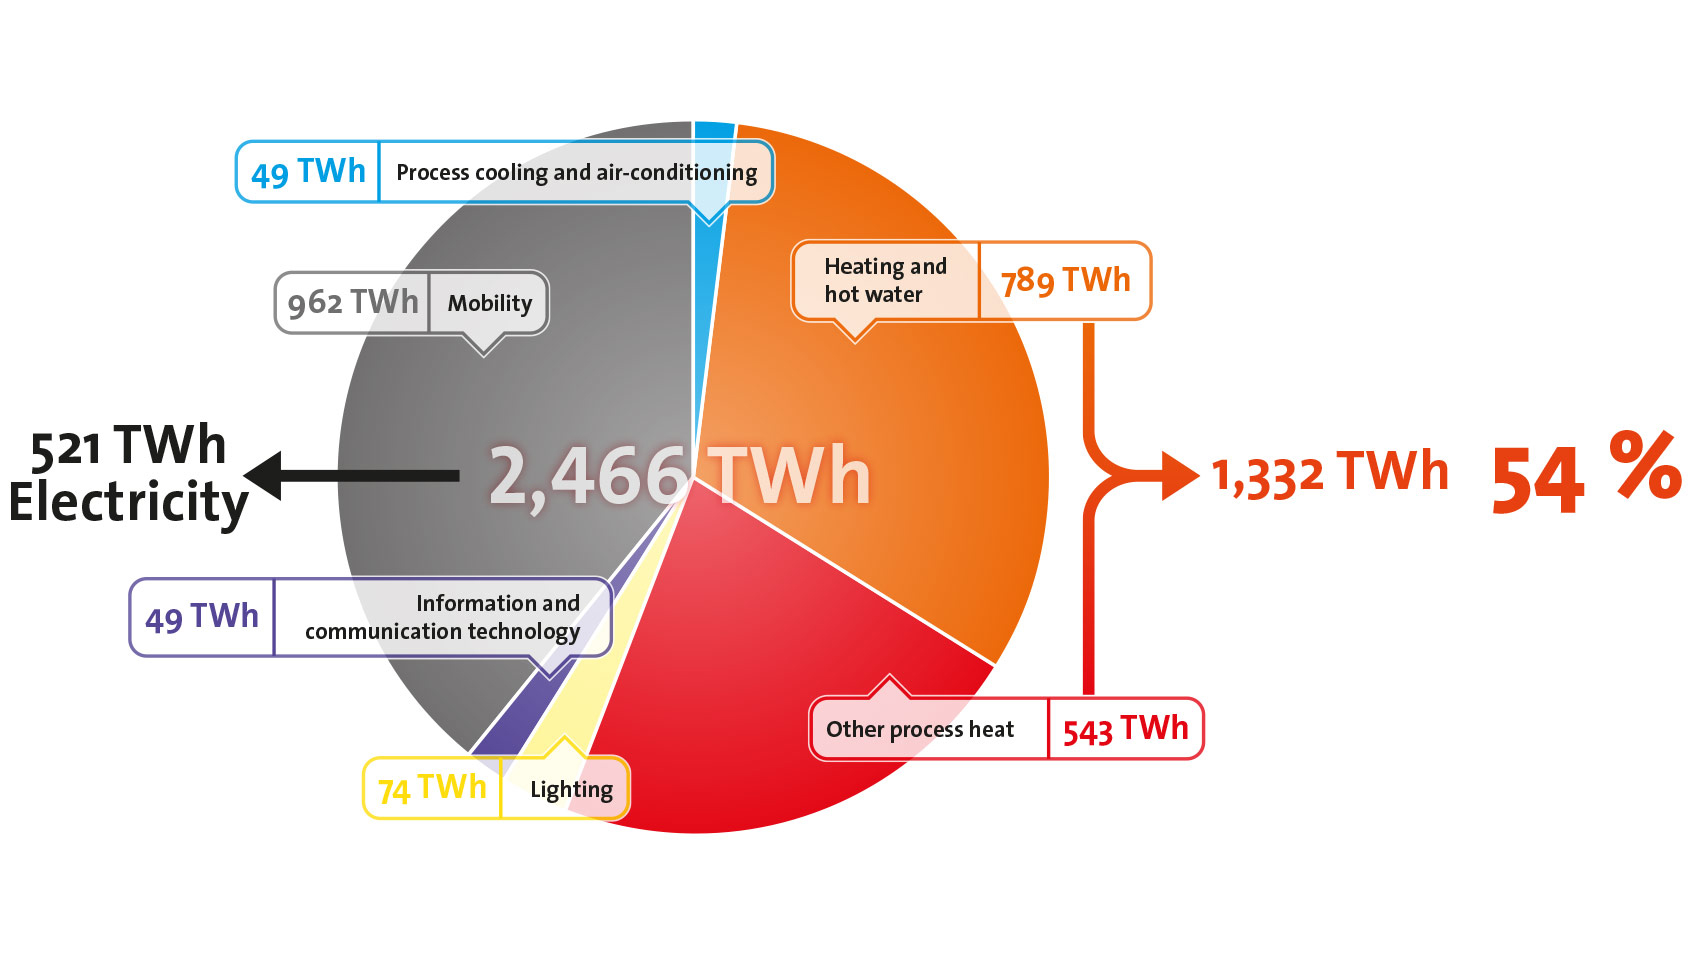 Germany's final energy consumption by sector / Resource: Working Group on Energy Balances (AGEB)